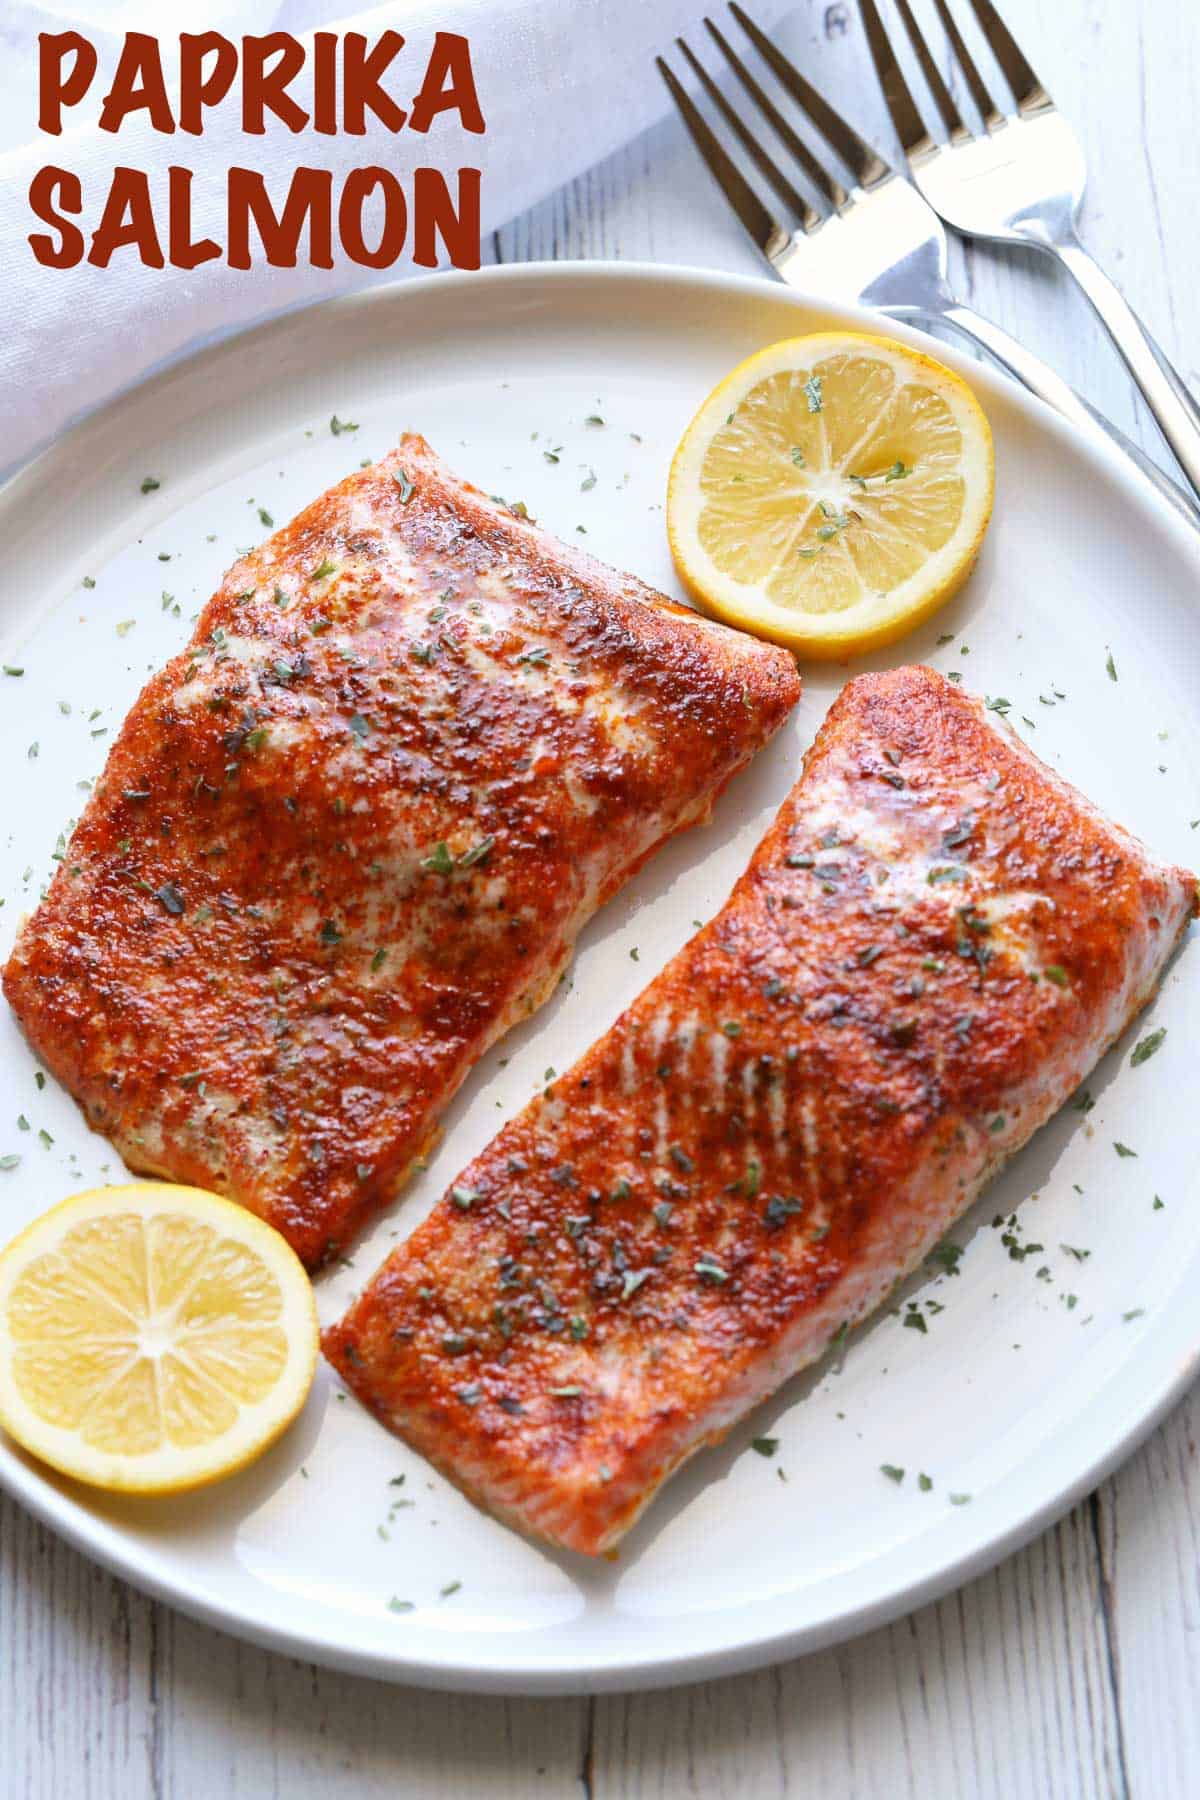 Salmon seasoned with paprika, served on a plate with lemon slices